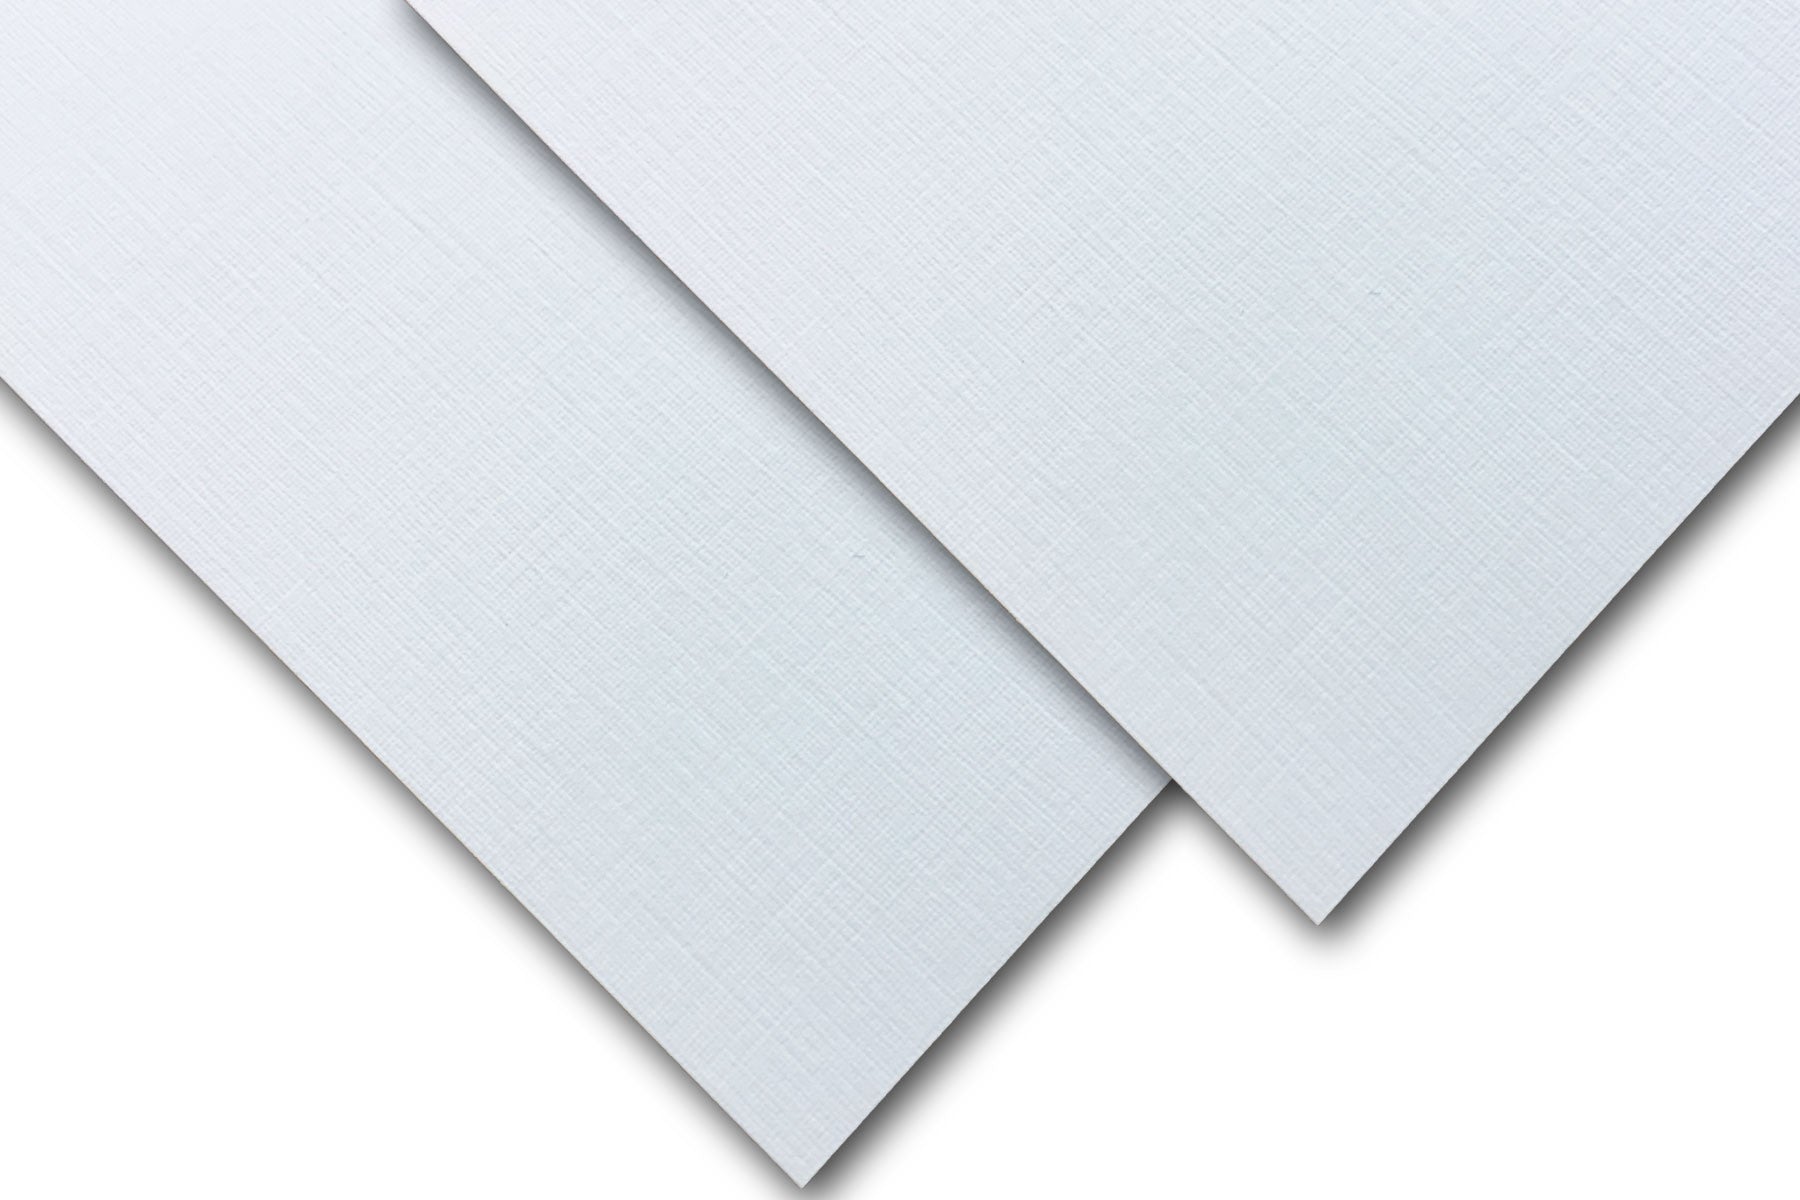 Classic Linen White Pearl Card Stock - 18 x 12 in 115 lb Cover Linen Digital C/2S 250 per Package